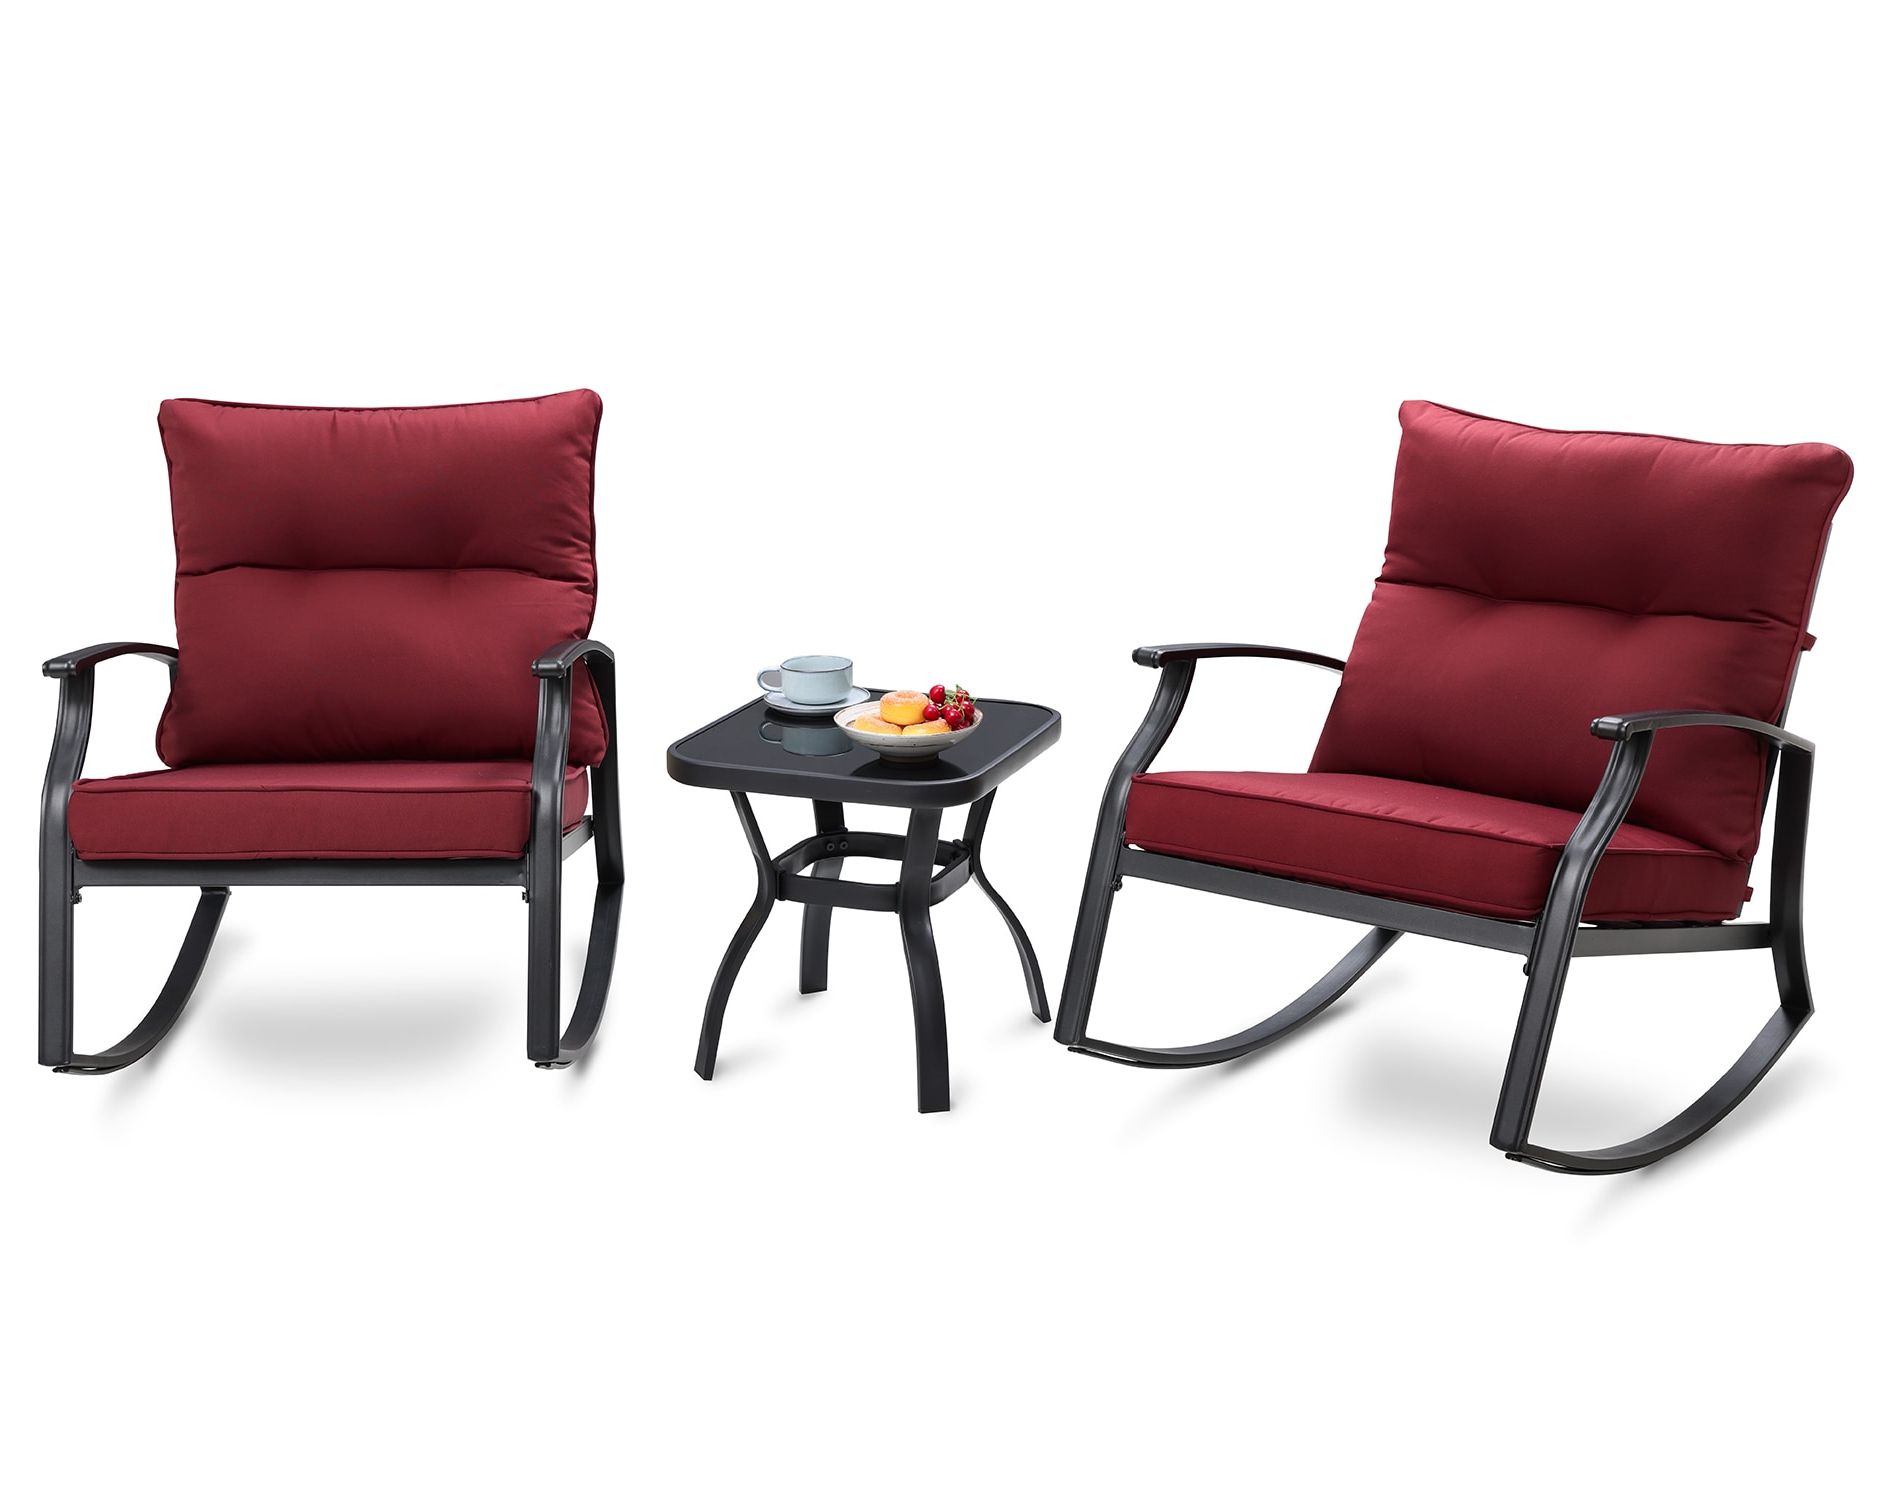 Well Liked Clihome Patio Rocking Chair 3 Piece Patio Conversation Set With Red Cushions  In The Patio Conversation Sets Department At Lowes For 3 Piece Cushion Rocking Chair Set (View 6 of 15)